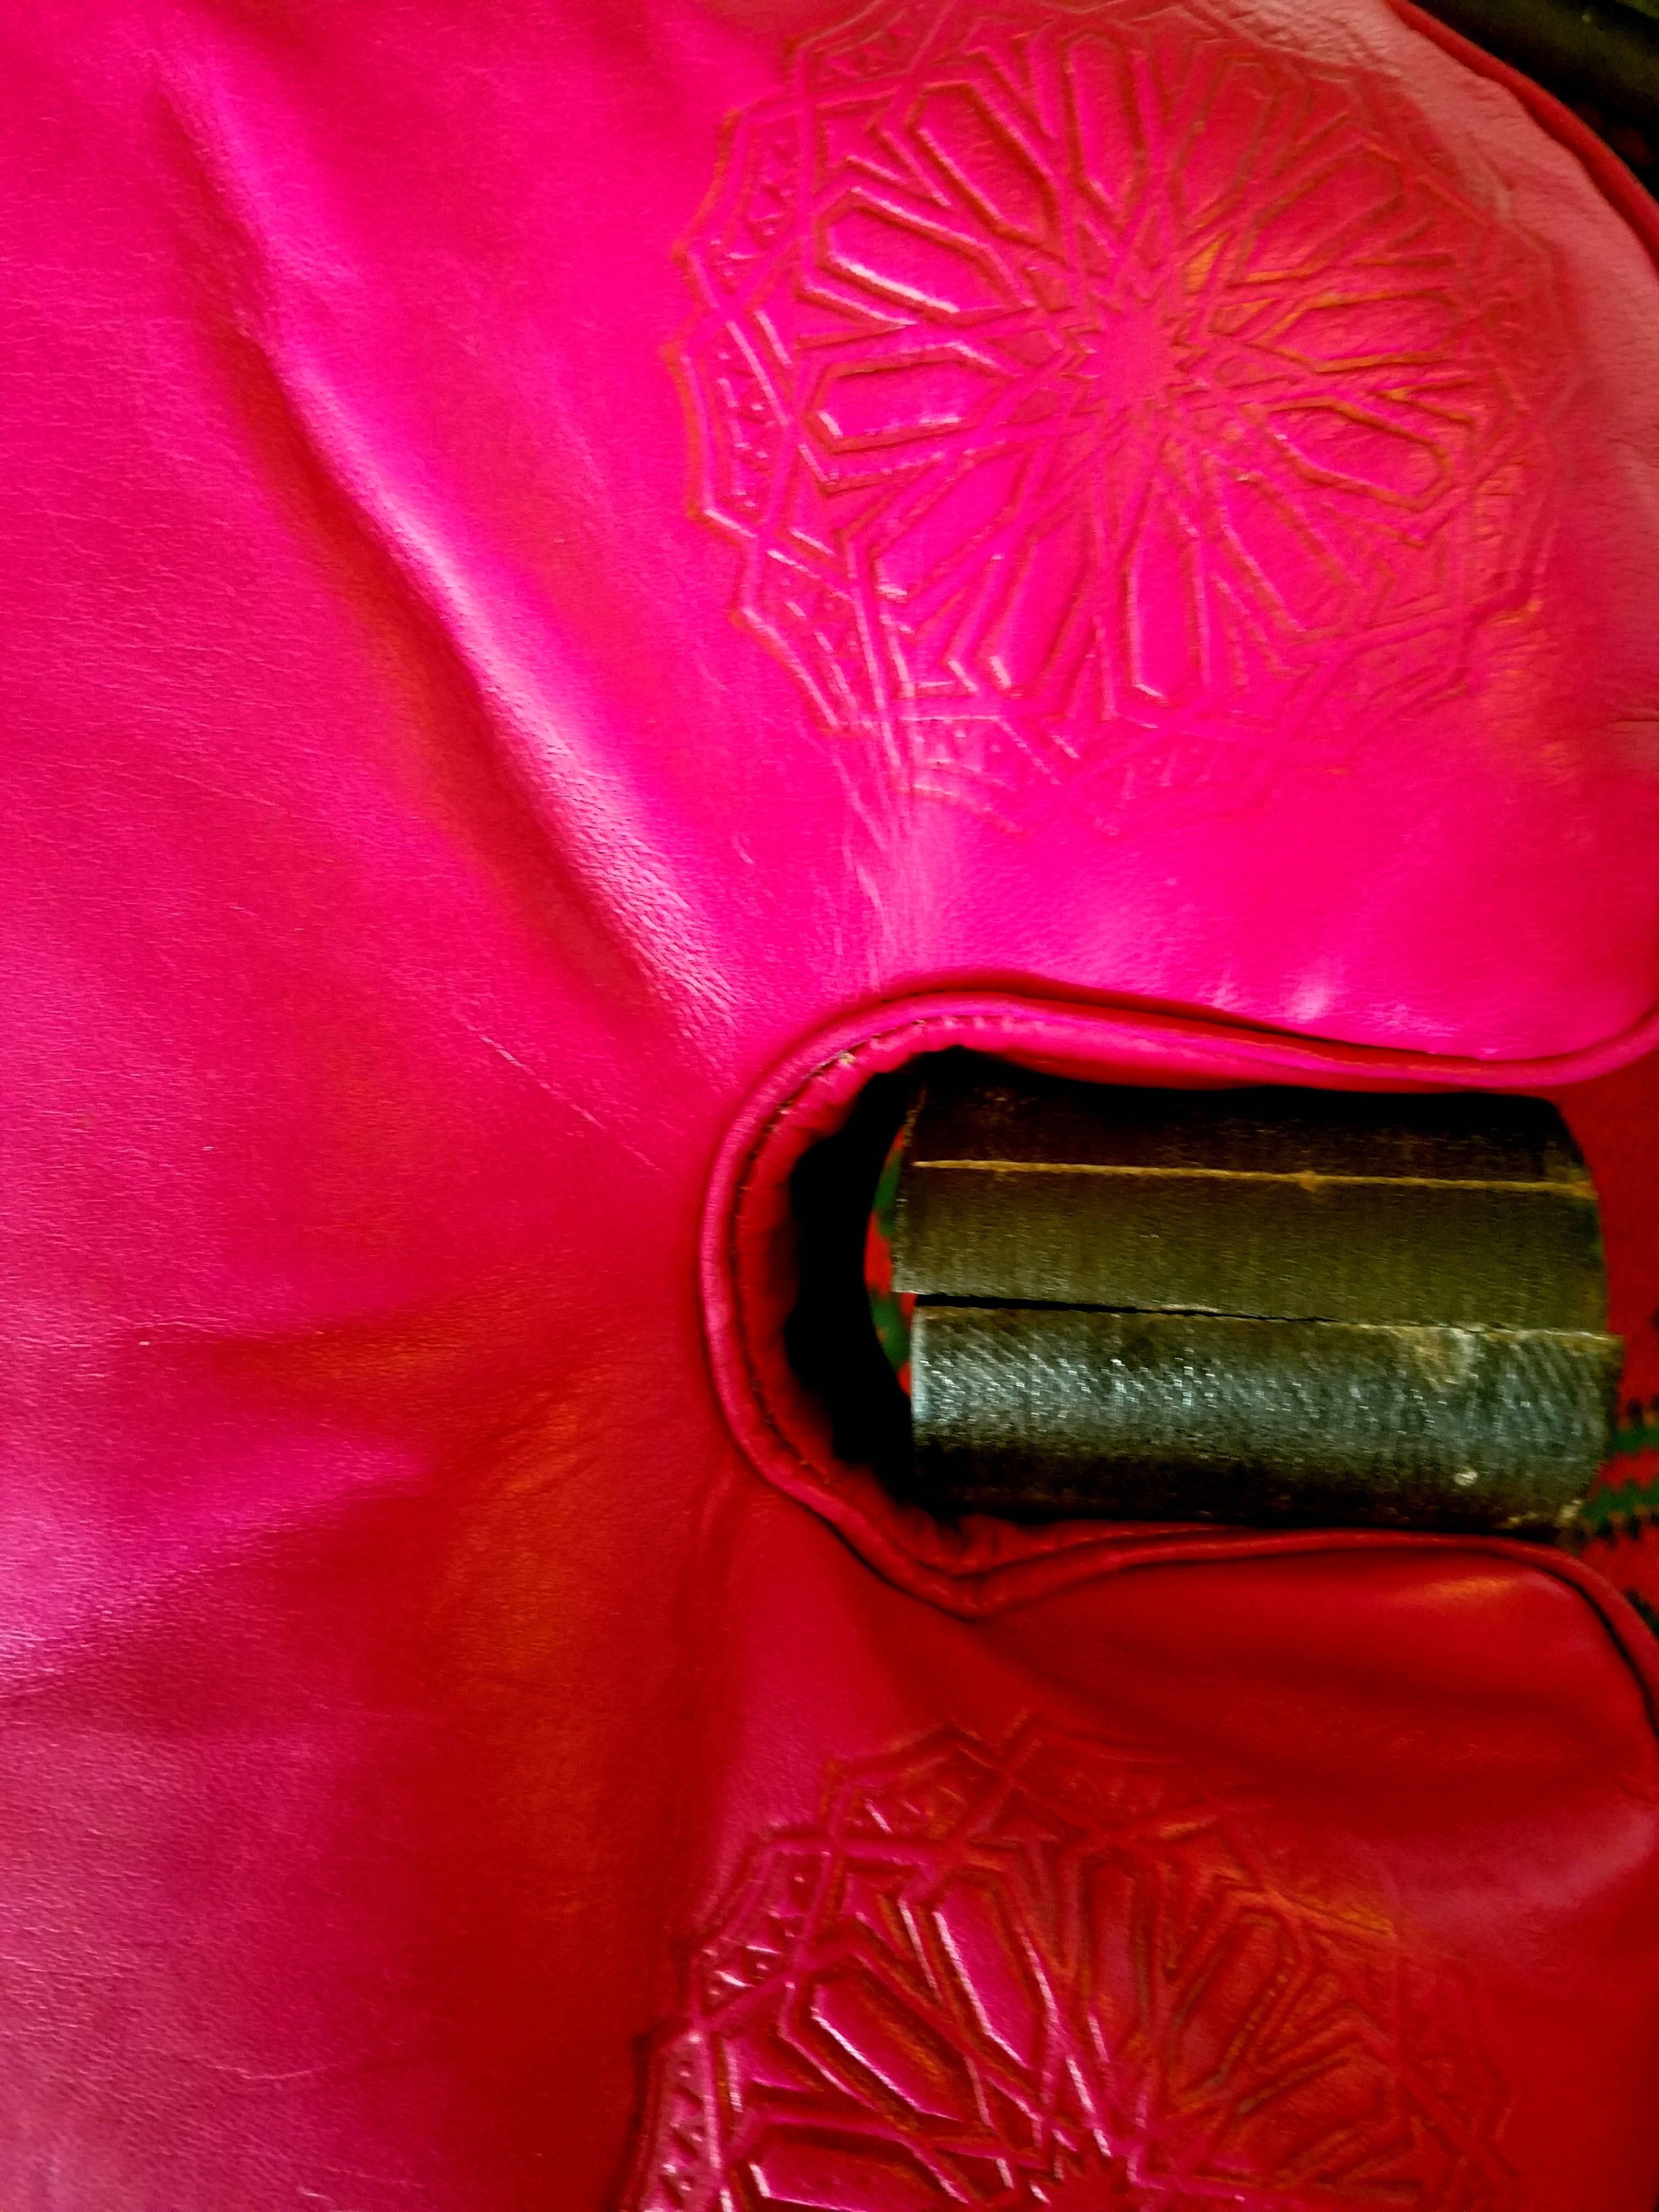 Handmade Moroccan Camel Saddle, Hot Pink Leather Cushion For Sale 1